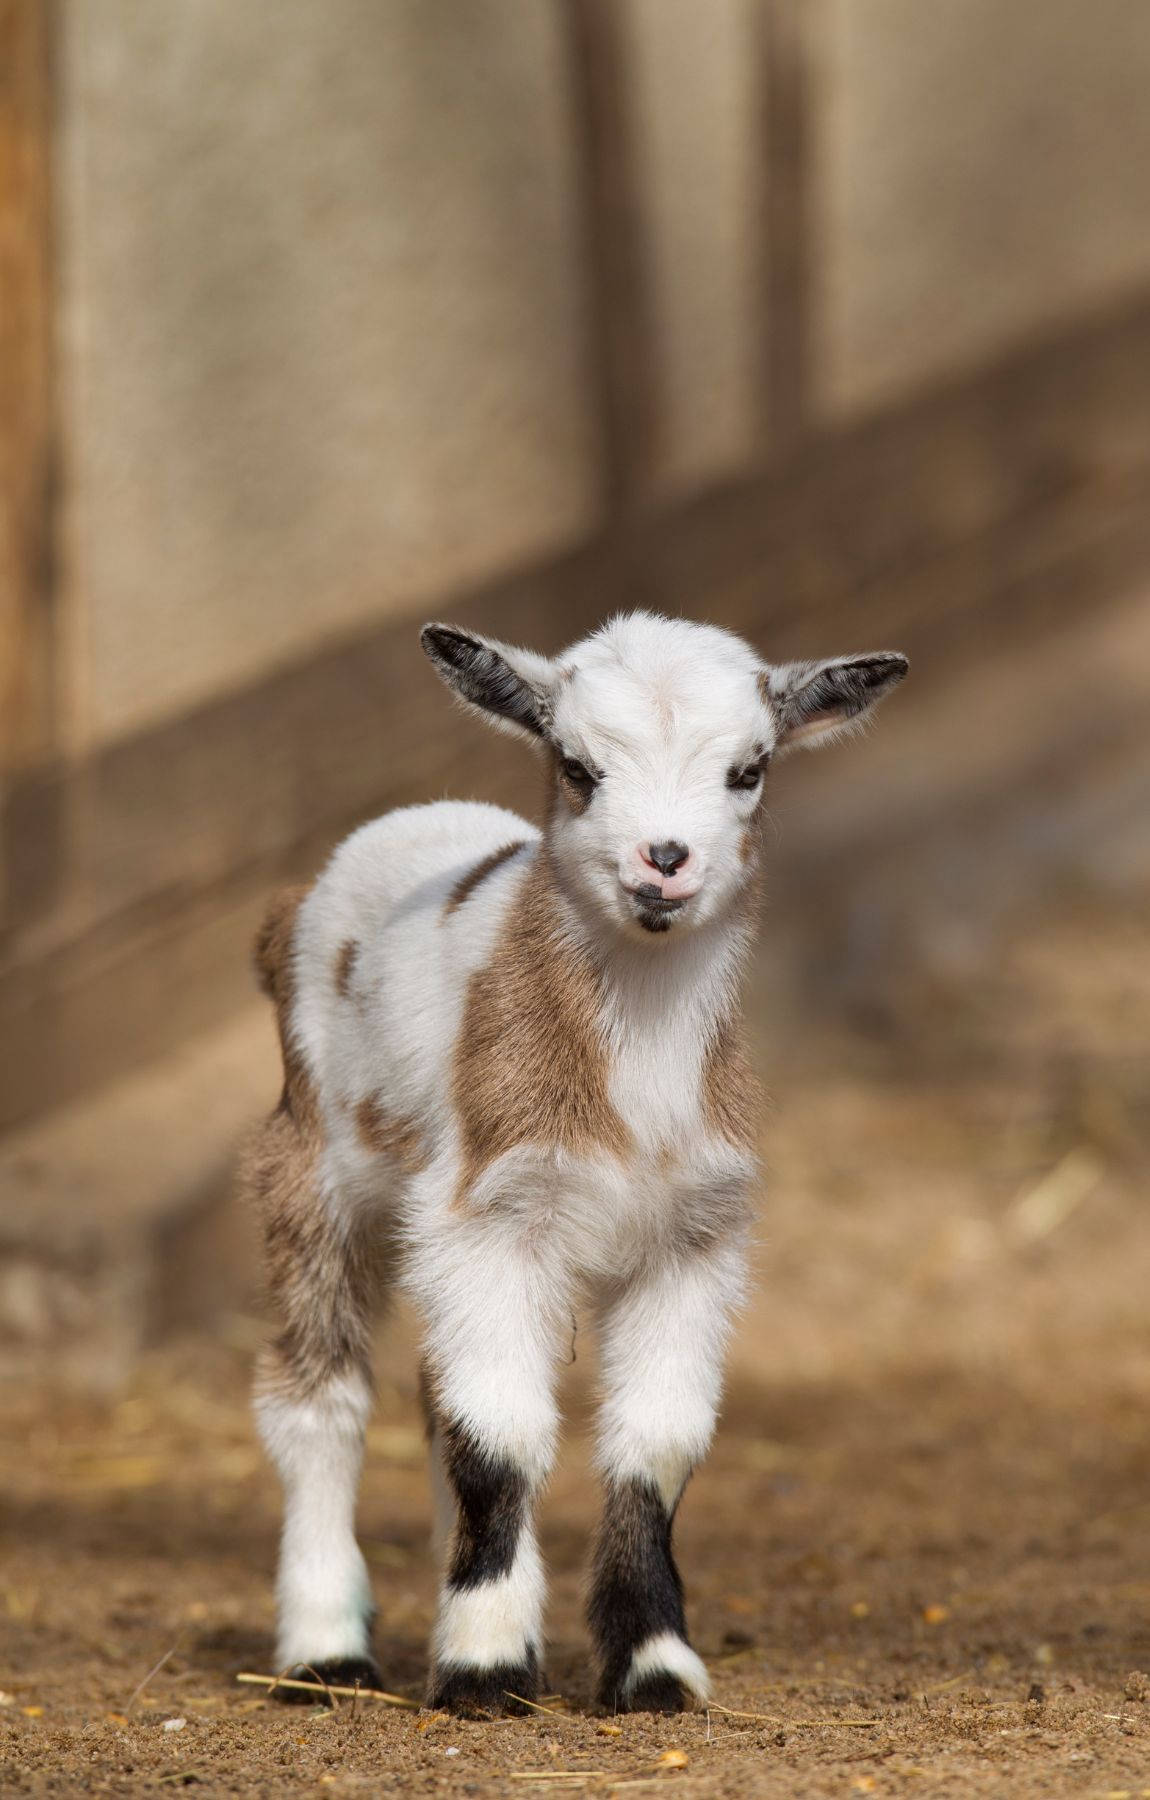 Charming Baby Goat In Country Farm Wallpaper